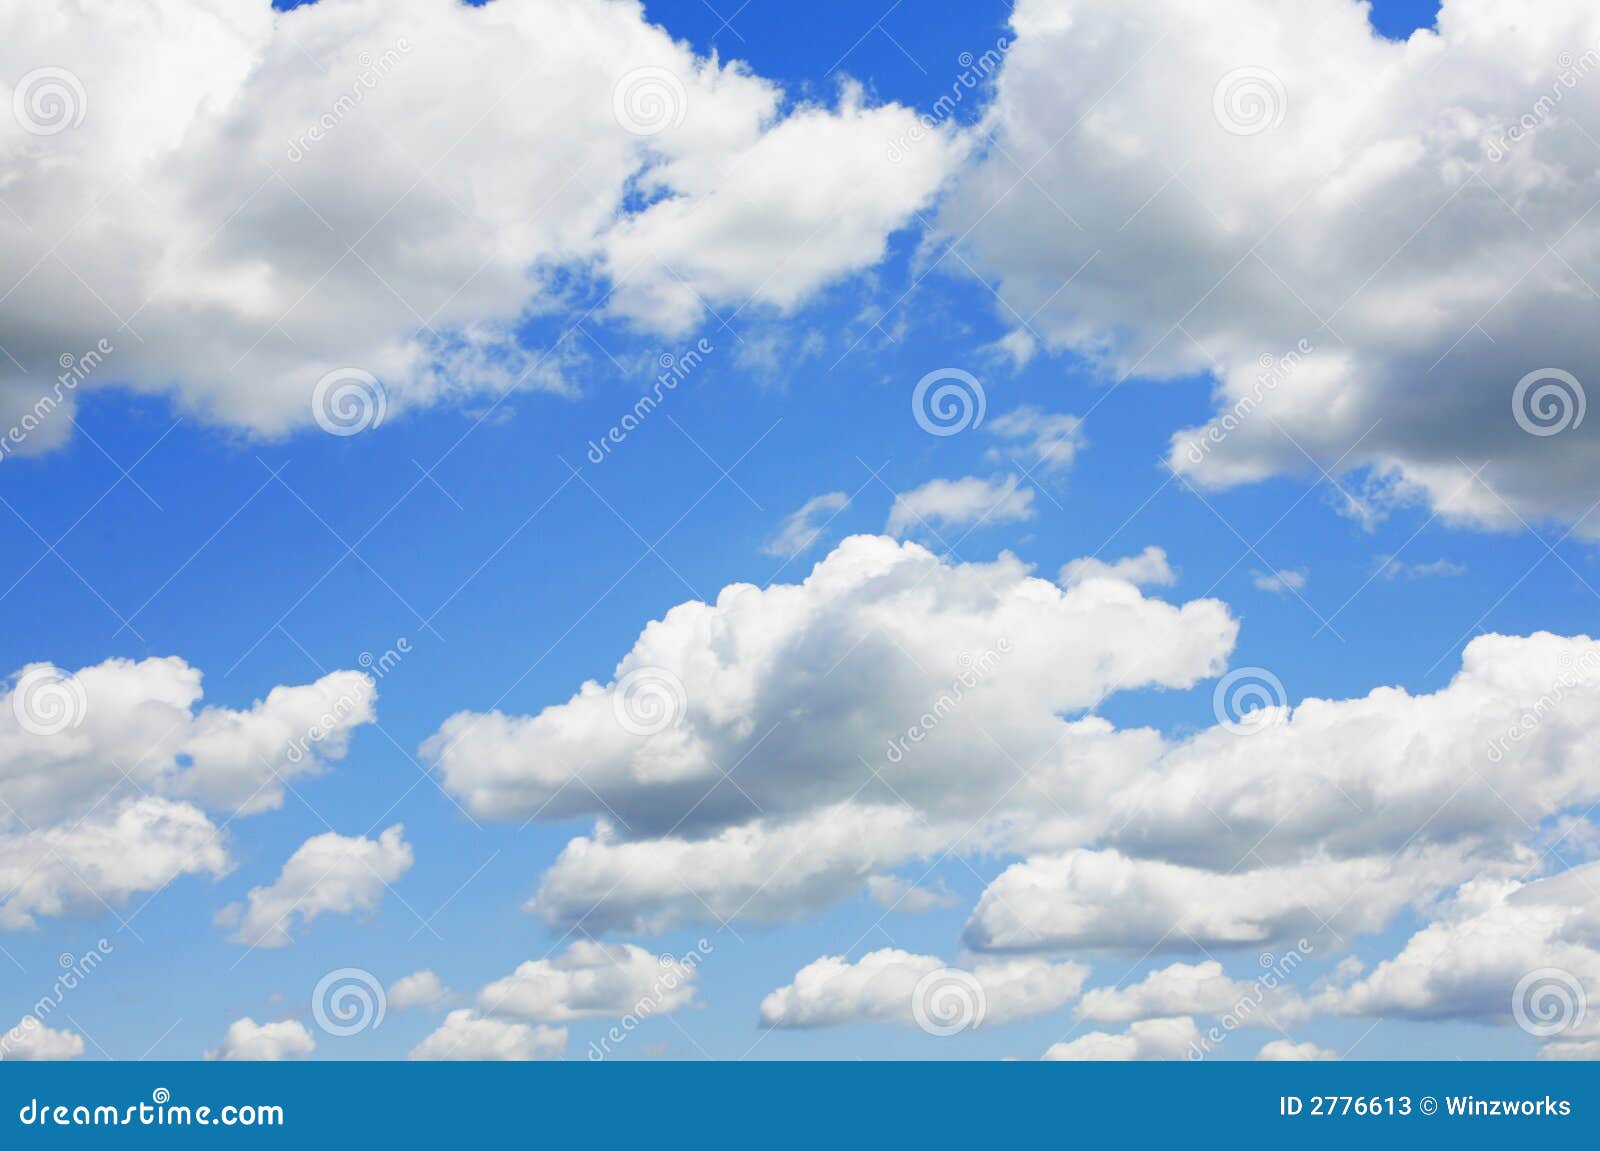 blue sky and puffy clouds